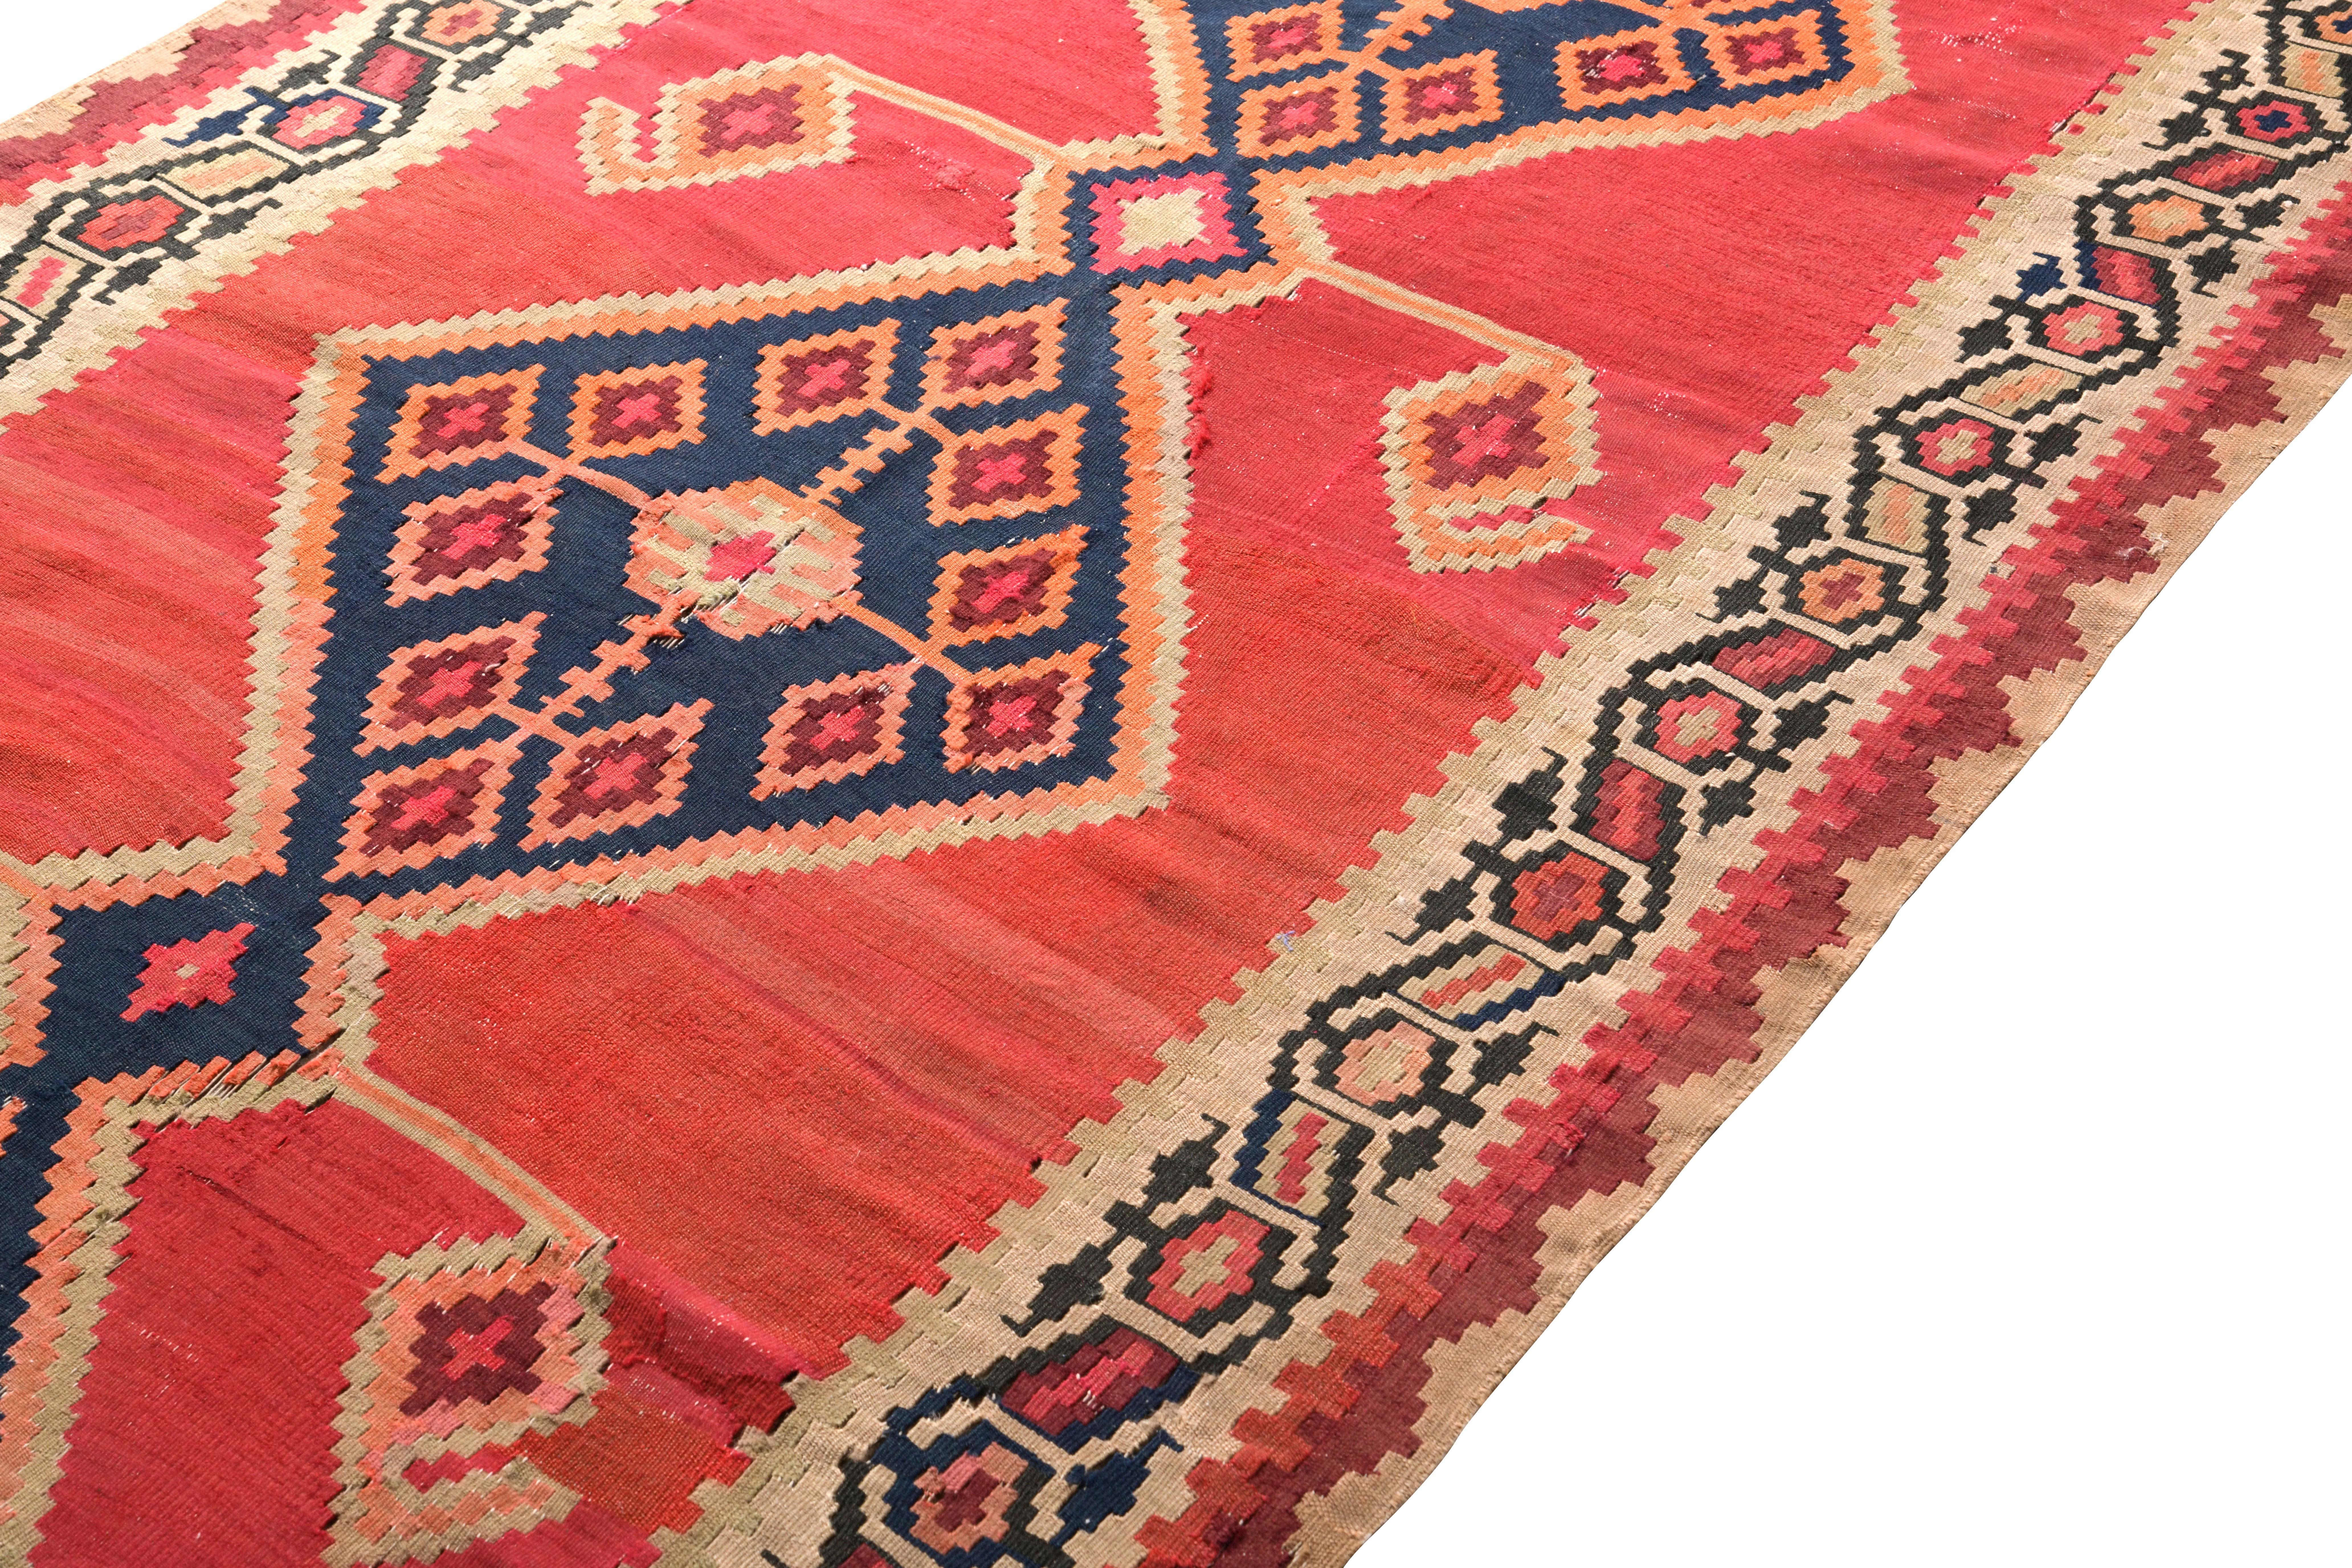 Hand-Woven Vintage Midcentury Persian Rug in Red and Beige Geometric Pattern by Rug & Kilim For Sale